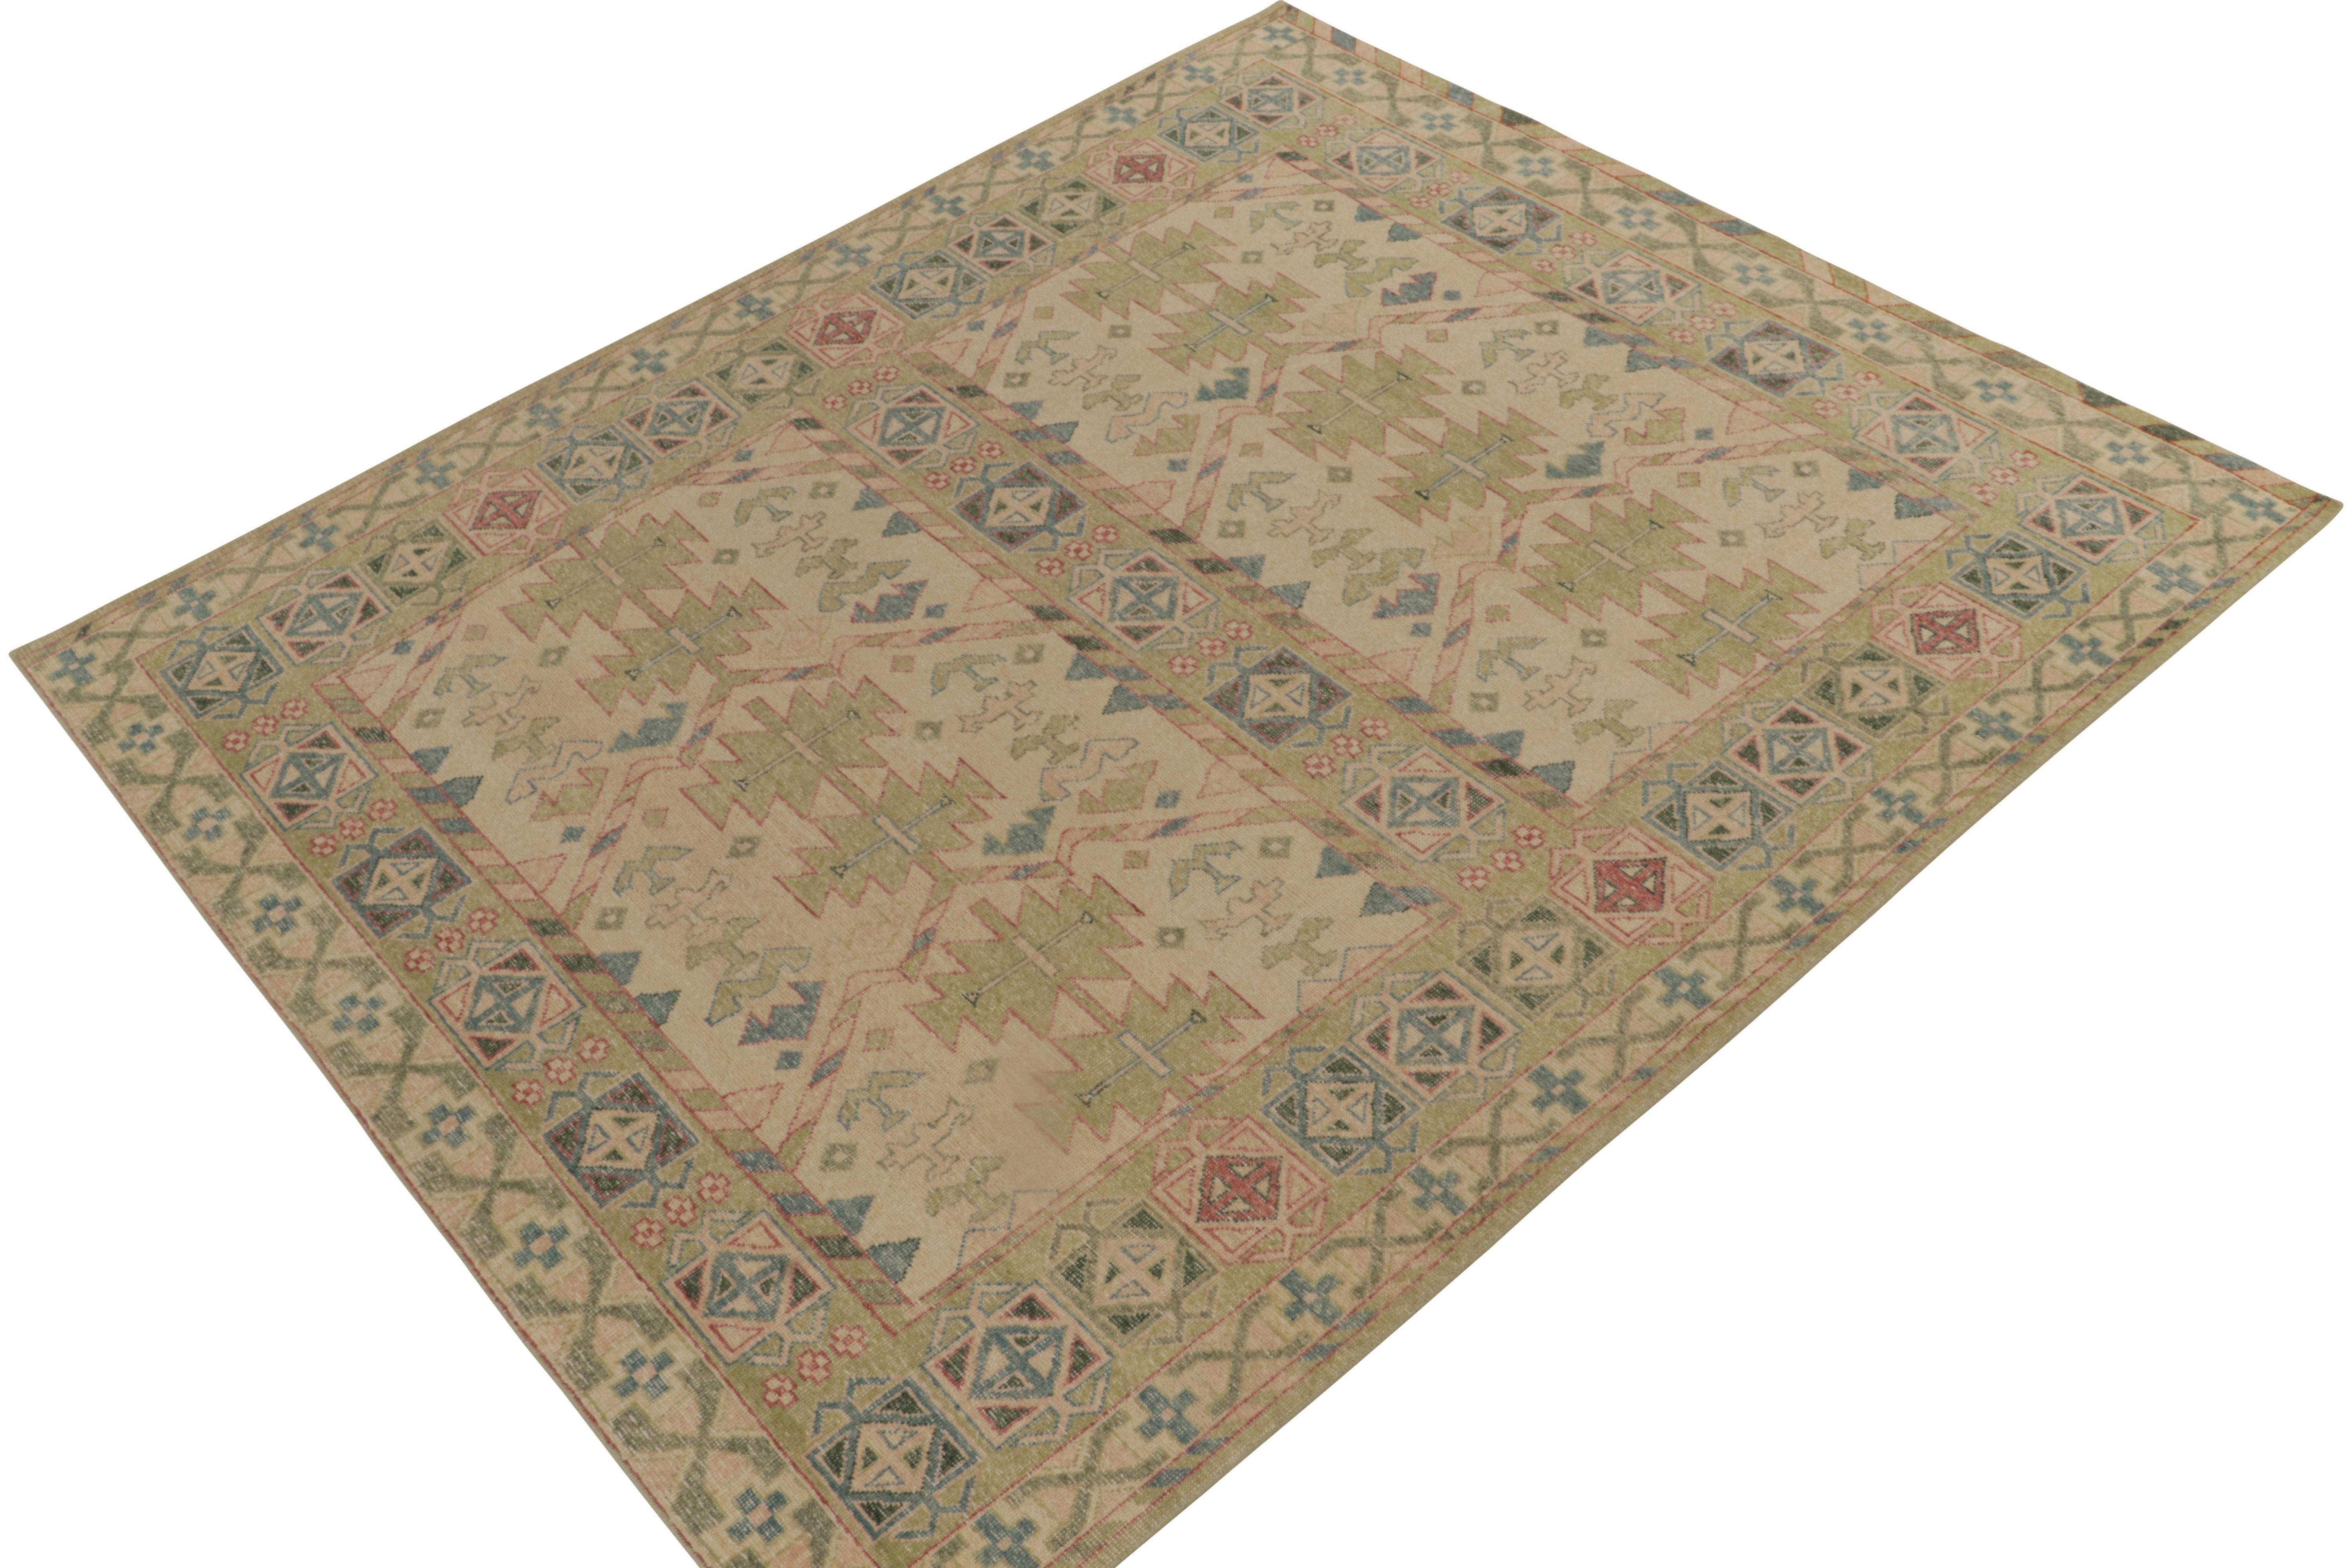 An 8x10 hand-knotted wool rug from Rug & Kilim’s Homage Collection. This vision is inspired by antique caucasian tribal patterns, recaptured in most unusual modern colors like this pale green, blue & beige embracing alluring tribal geometric